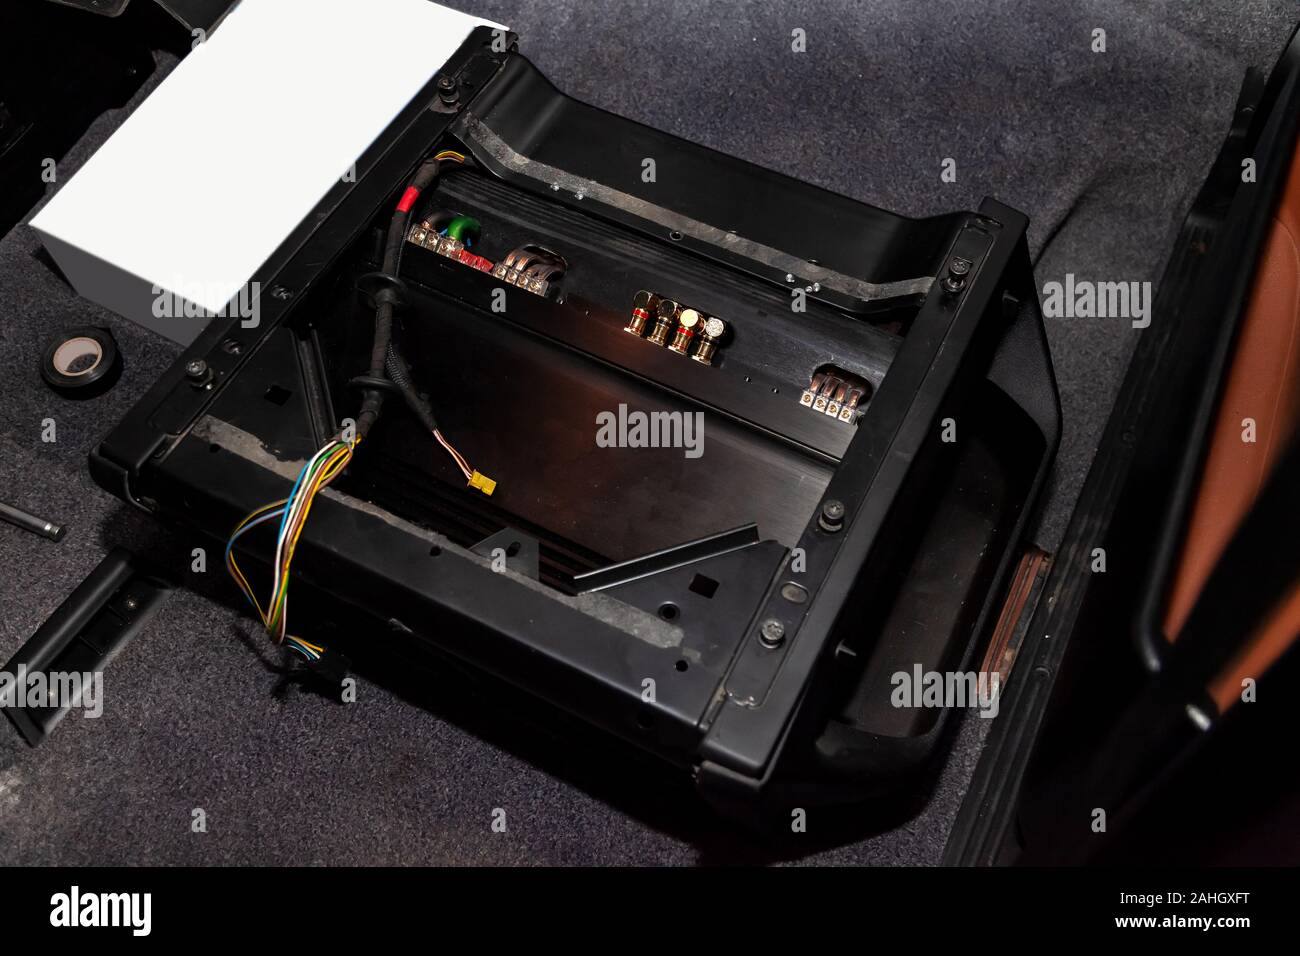 The amplifier of the car audio system in a black metal housing mounted on the floor of the vehicle in a repair and tuning workshop. Auto service indus Stock Photo